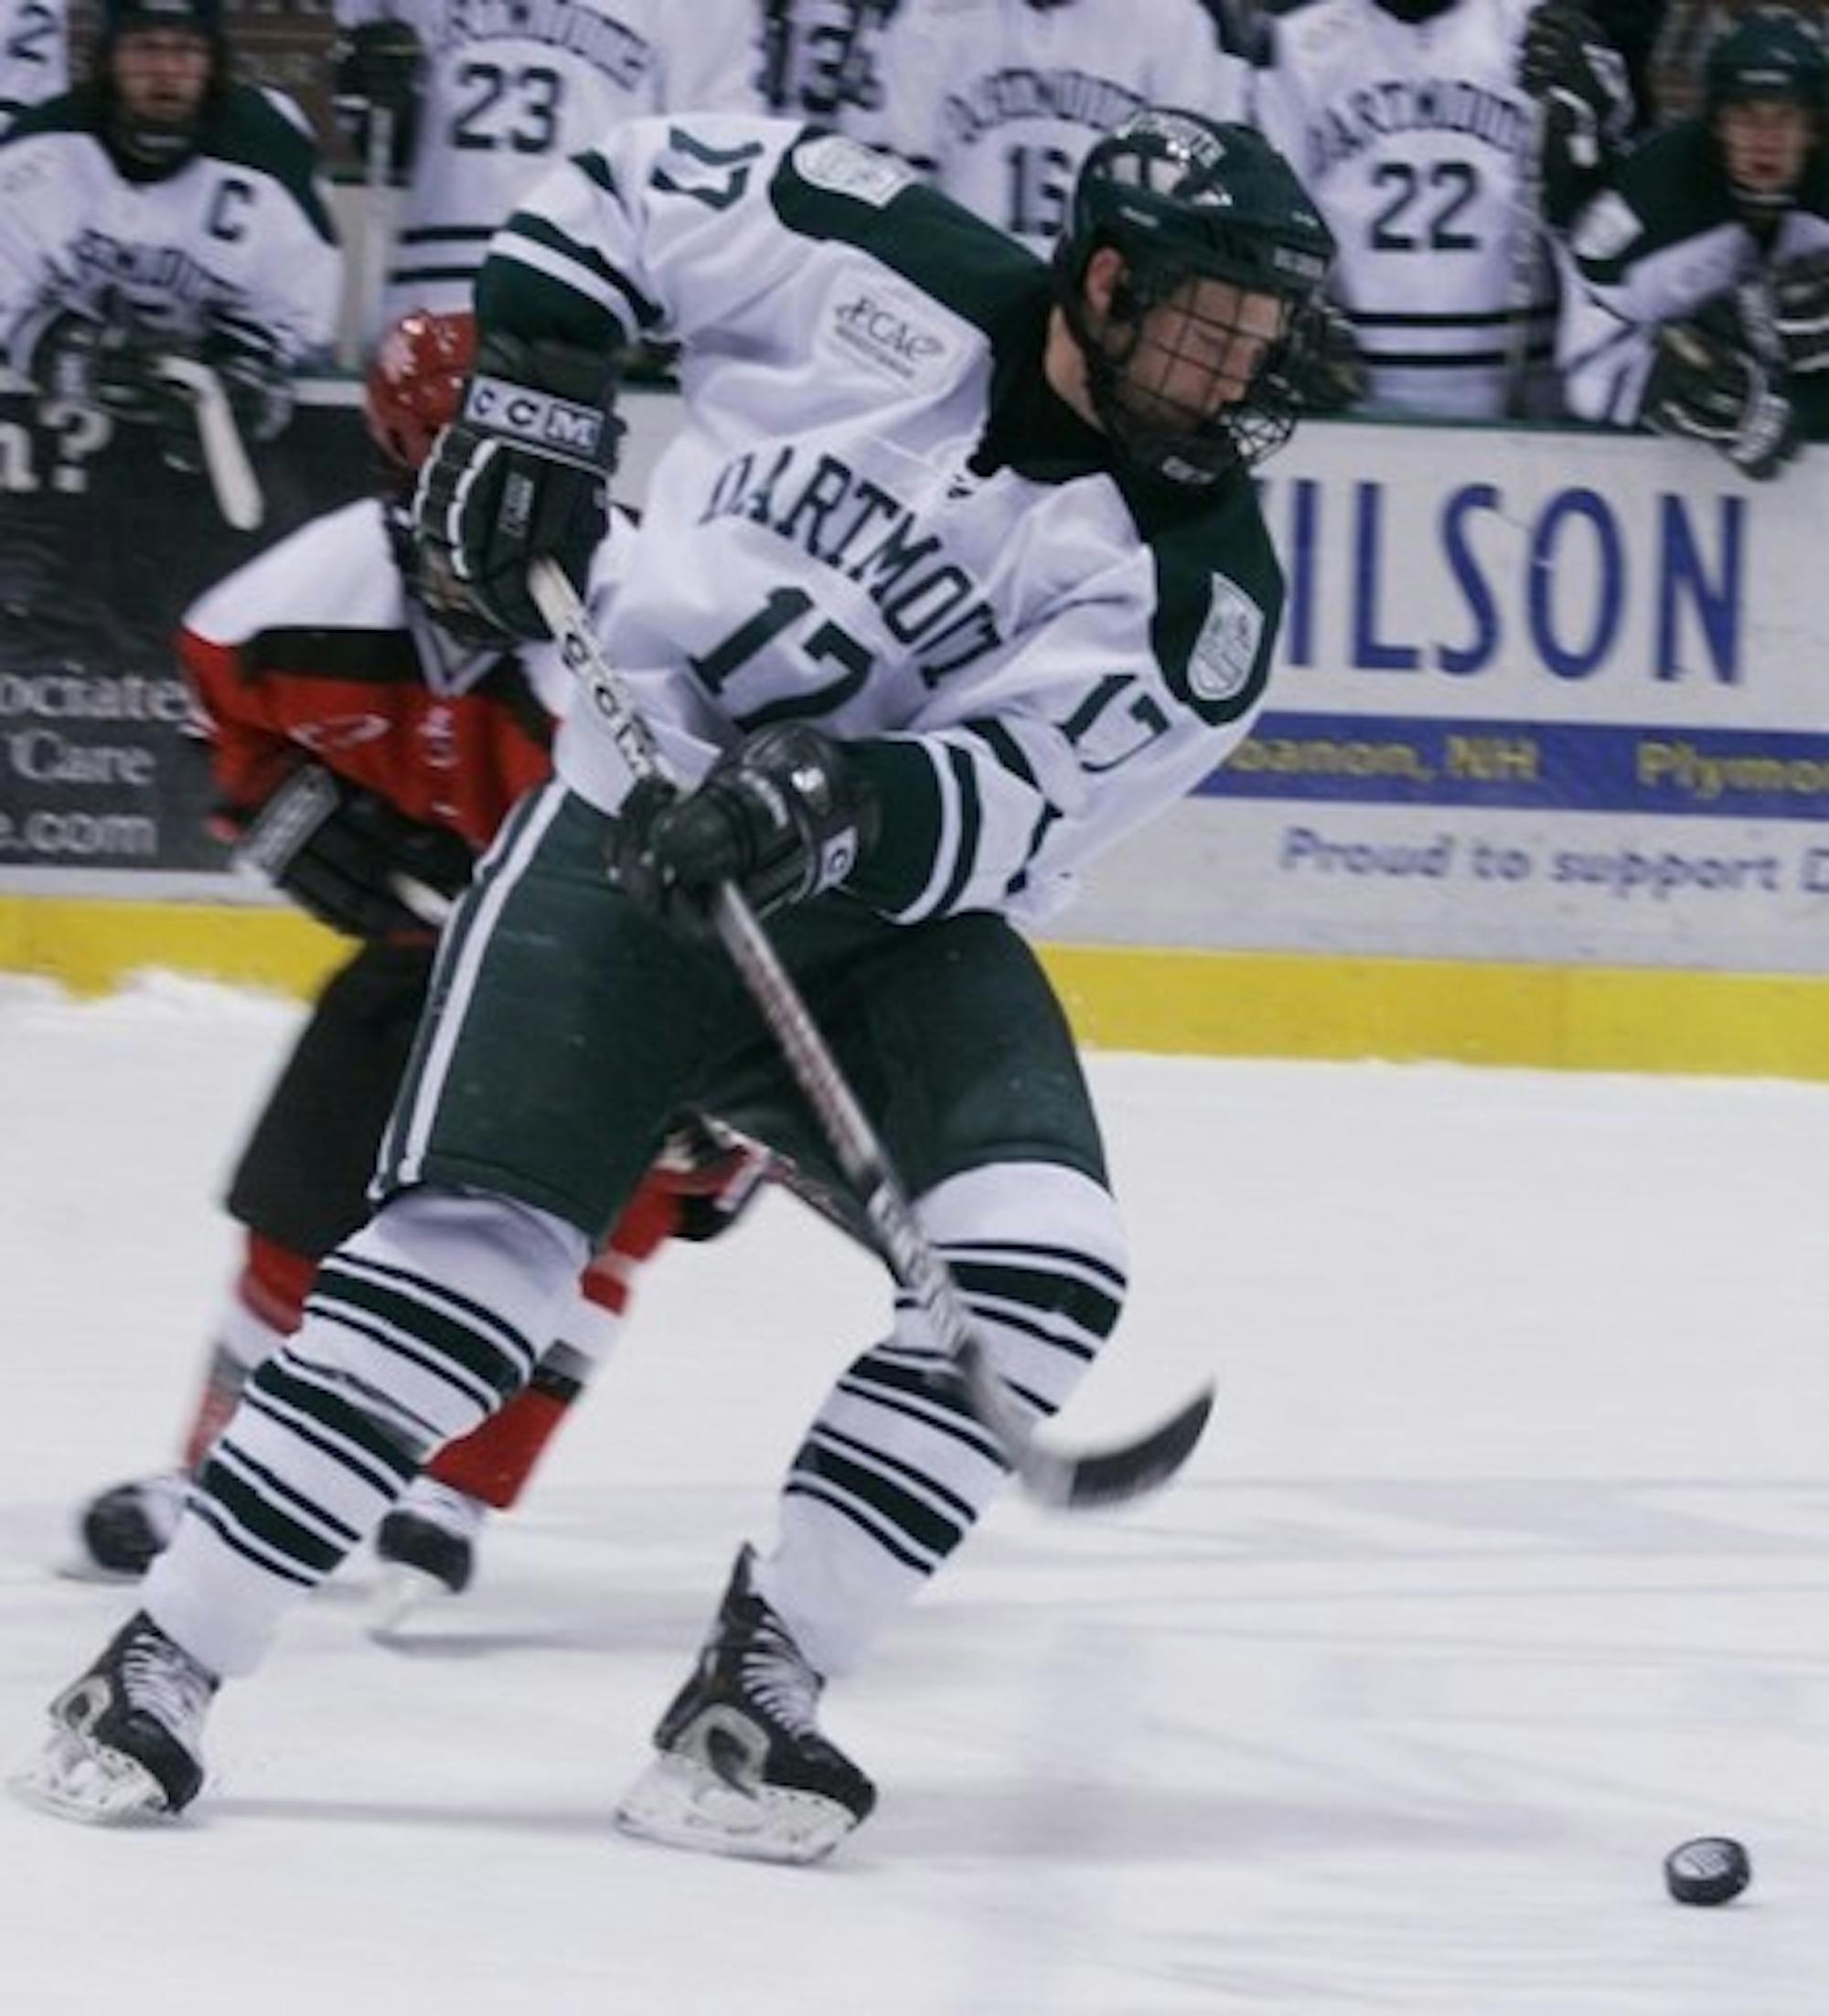 The Big Green fell to in-state rival UNH over the holiday weekend.